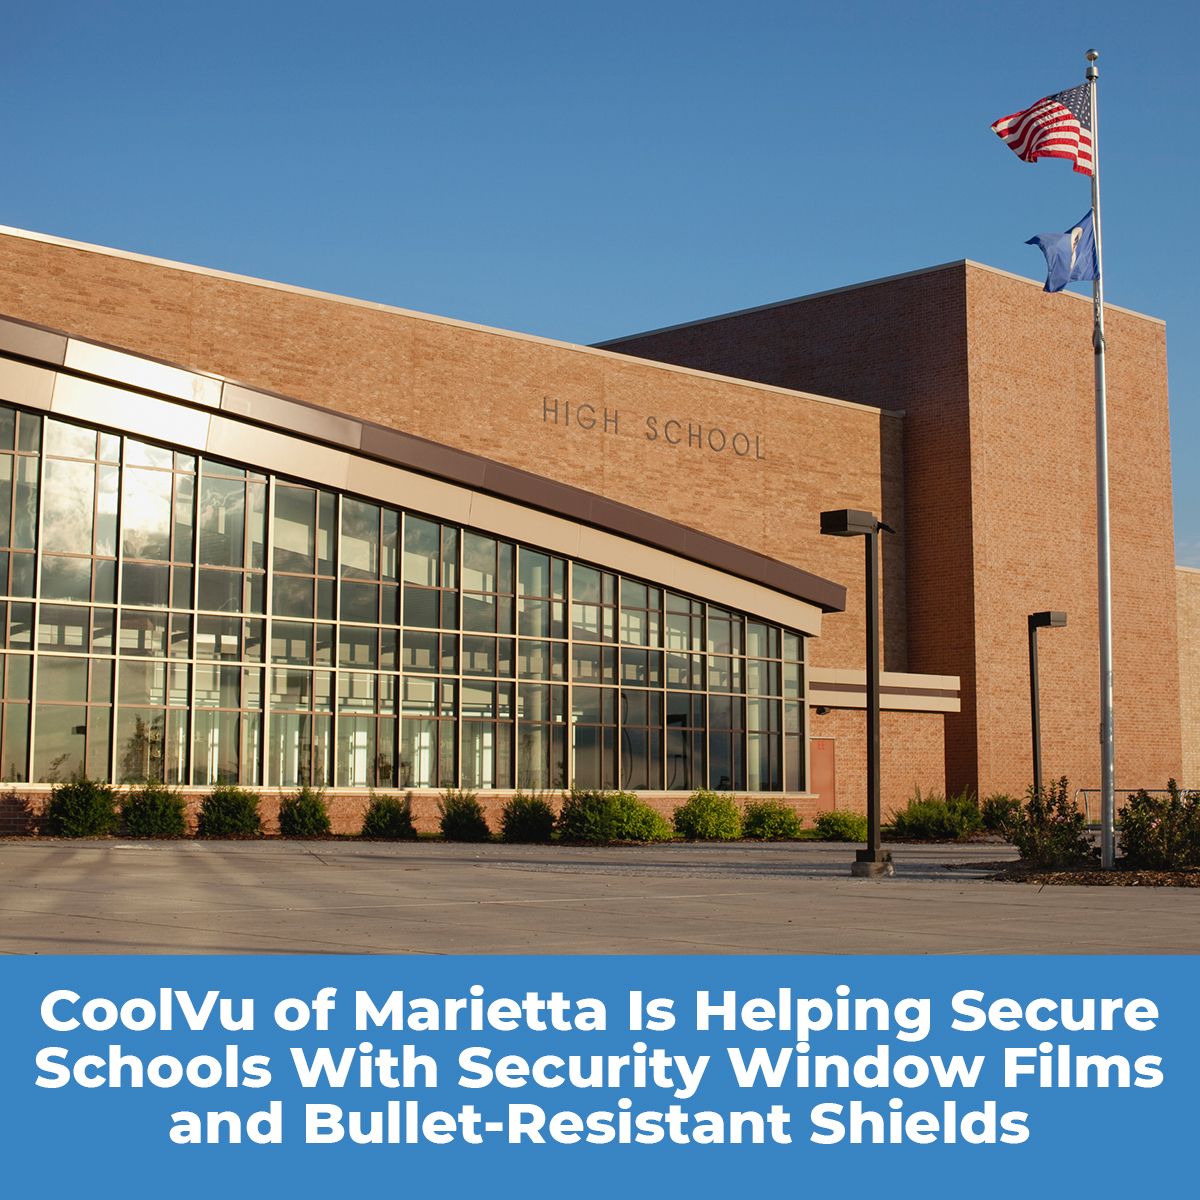 CoolVu of Marietta Is Helping Secure Schools With Security Window Films and Bullet-Resistant Shields